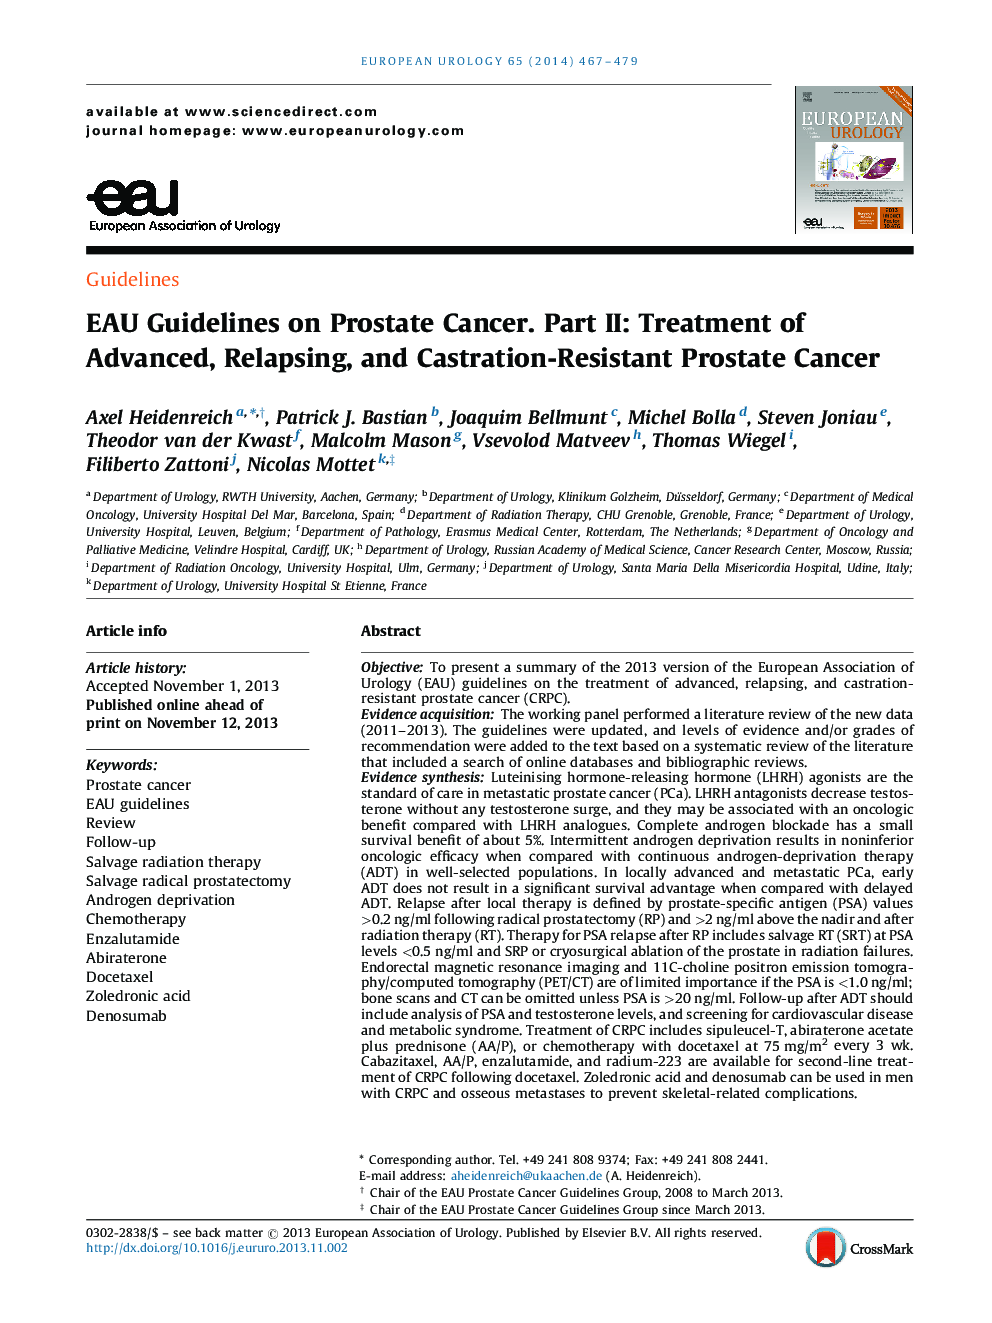 EAU Guidelines on Prostate Cancer. Part II: Treatment of Advanced, Relapsing, and Castration-Resistant Prostate Cancer